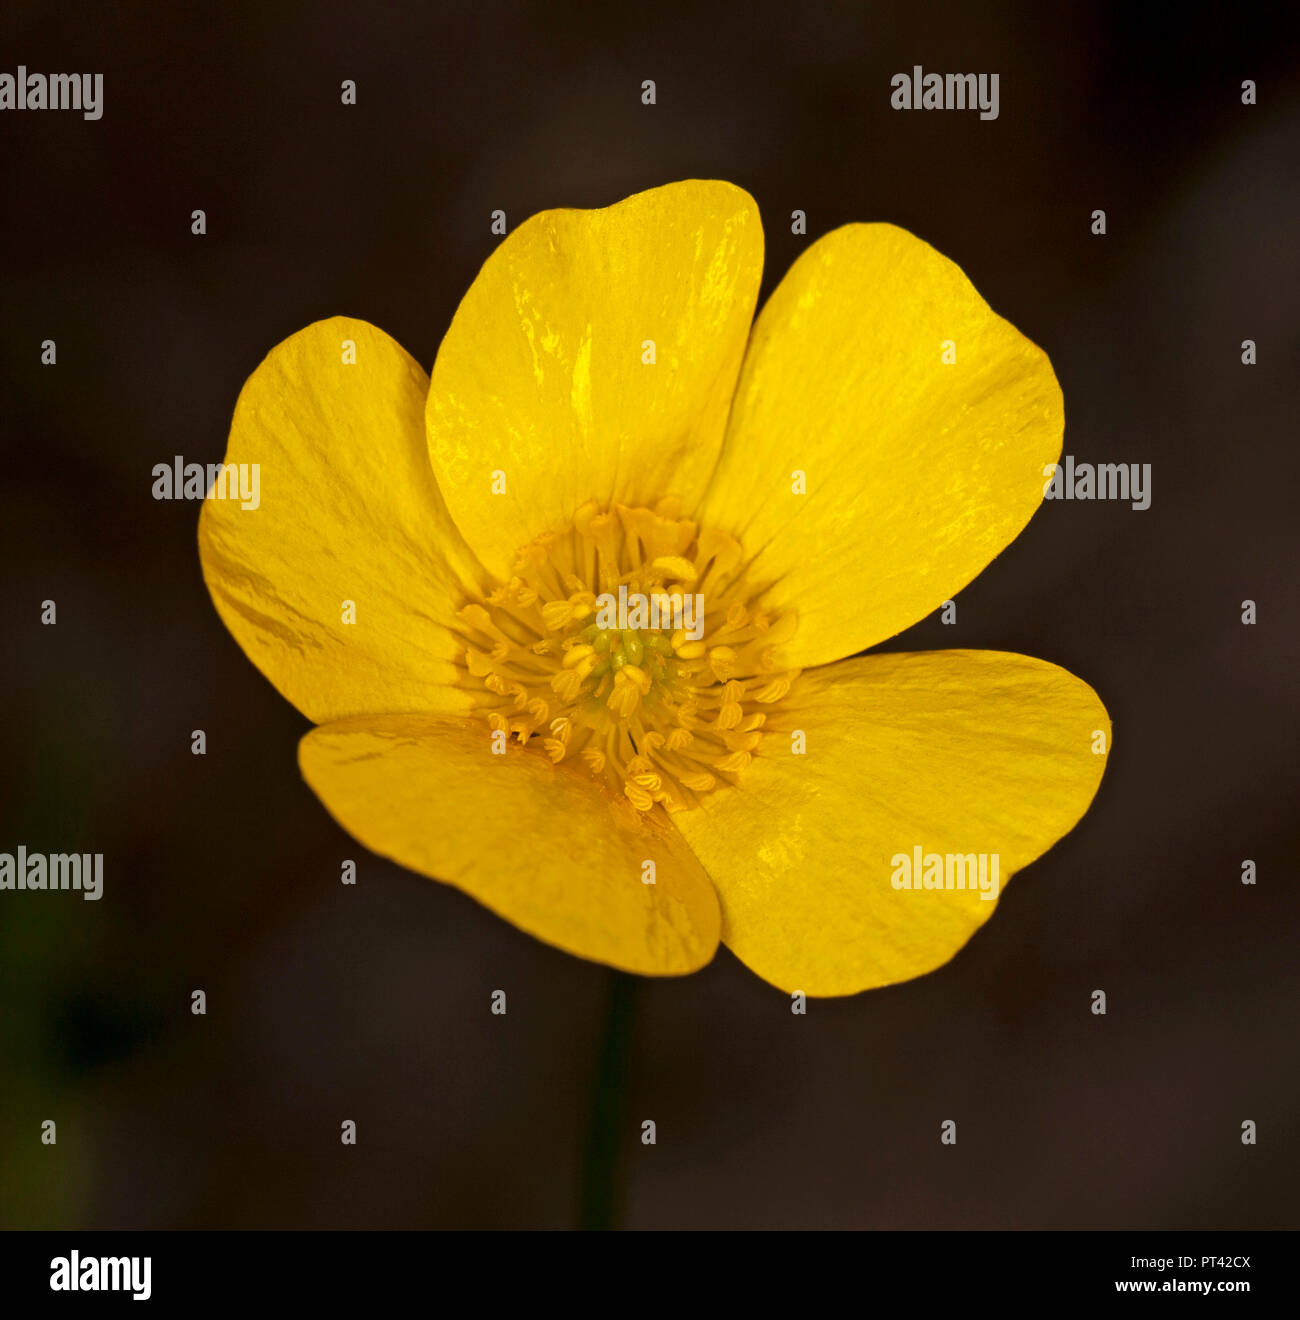 Golden yellow flower of Ranuculus lappaceus, common buttercup, and Australian wildflower, against a dark background Stock Photo